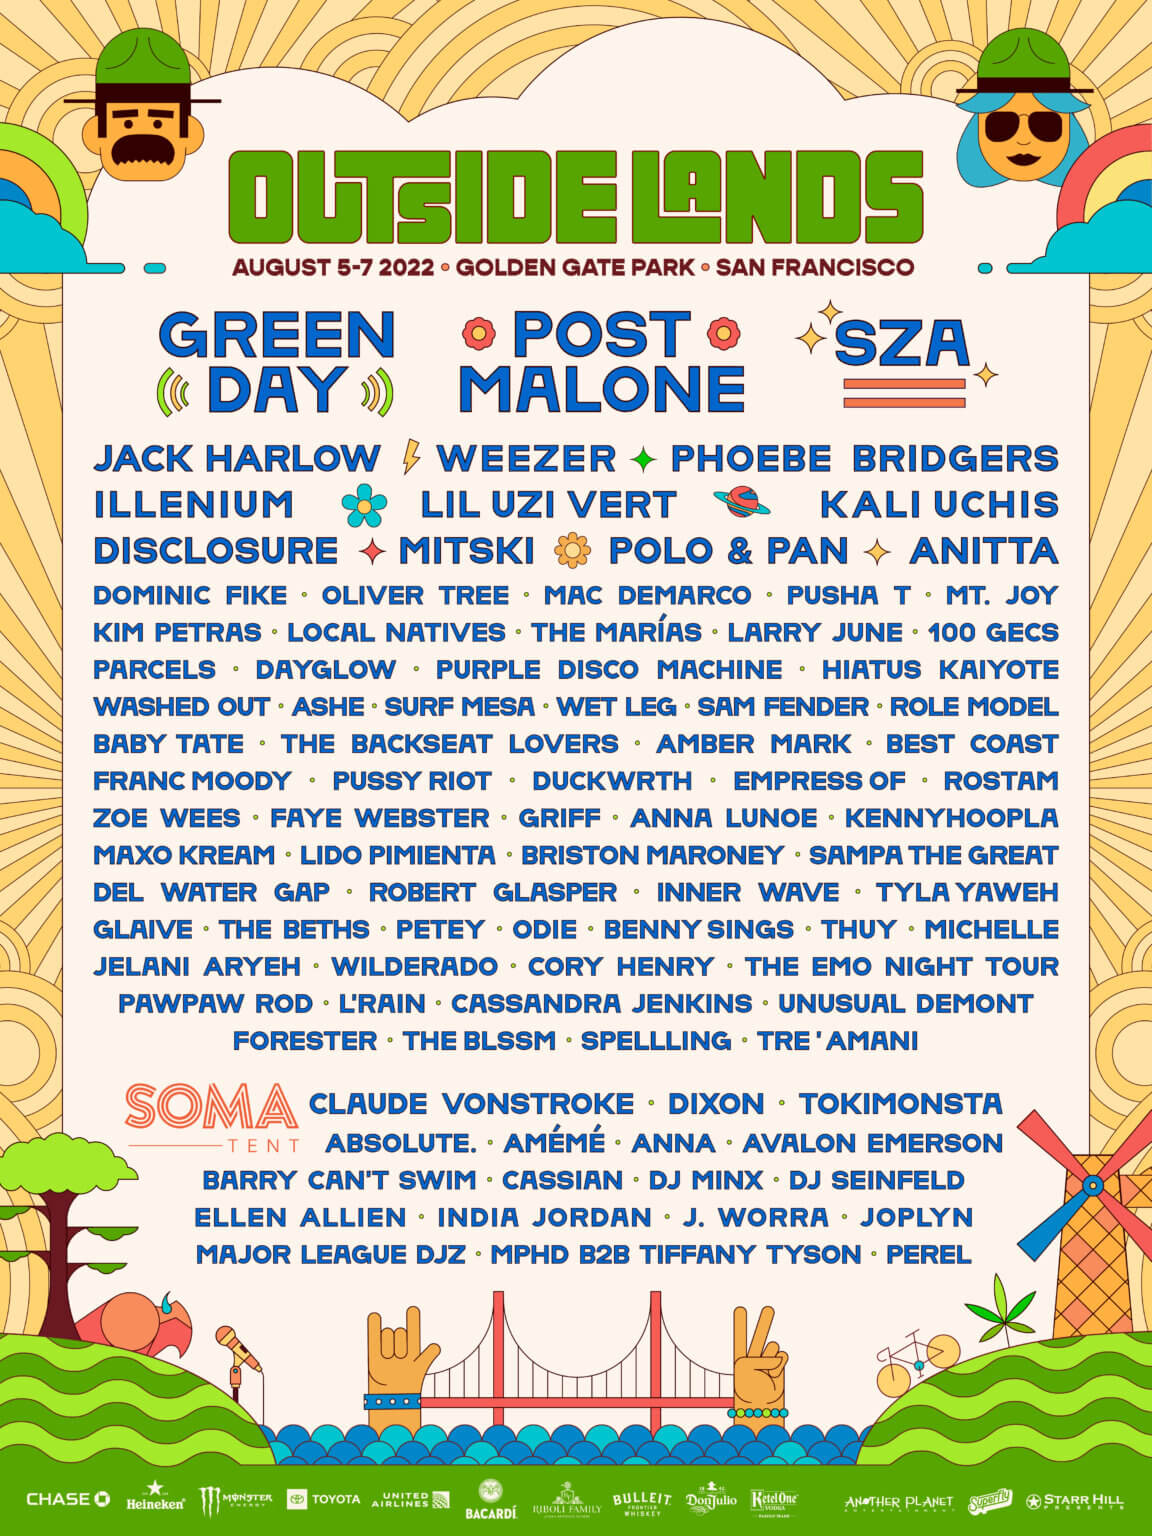 Outside Lands has announced their 2022 festival lineup. Headliners include SZA, Weezer, Phoebe Bridgers, Disclosure, Mitski and more